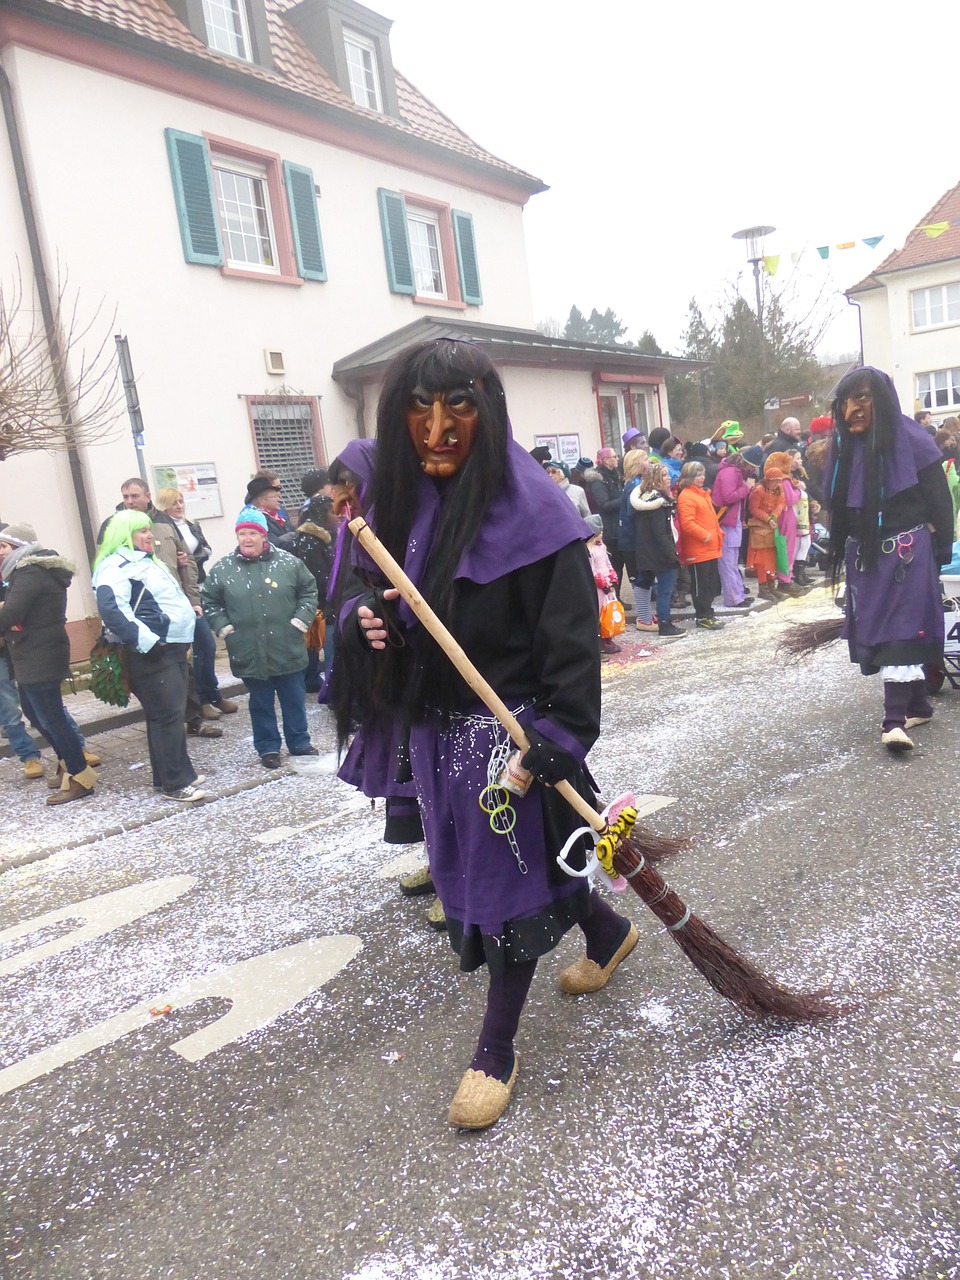 the witch alemannic fasnet customs free photo